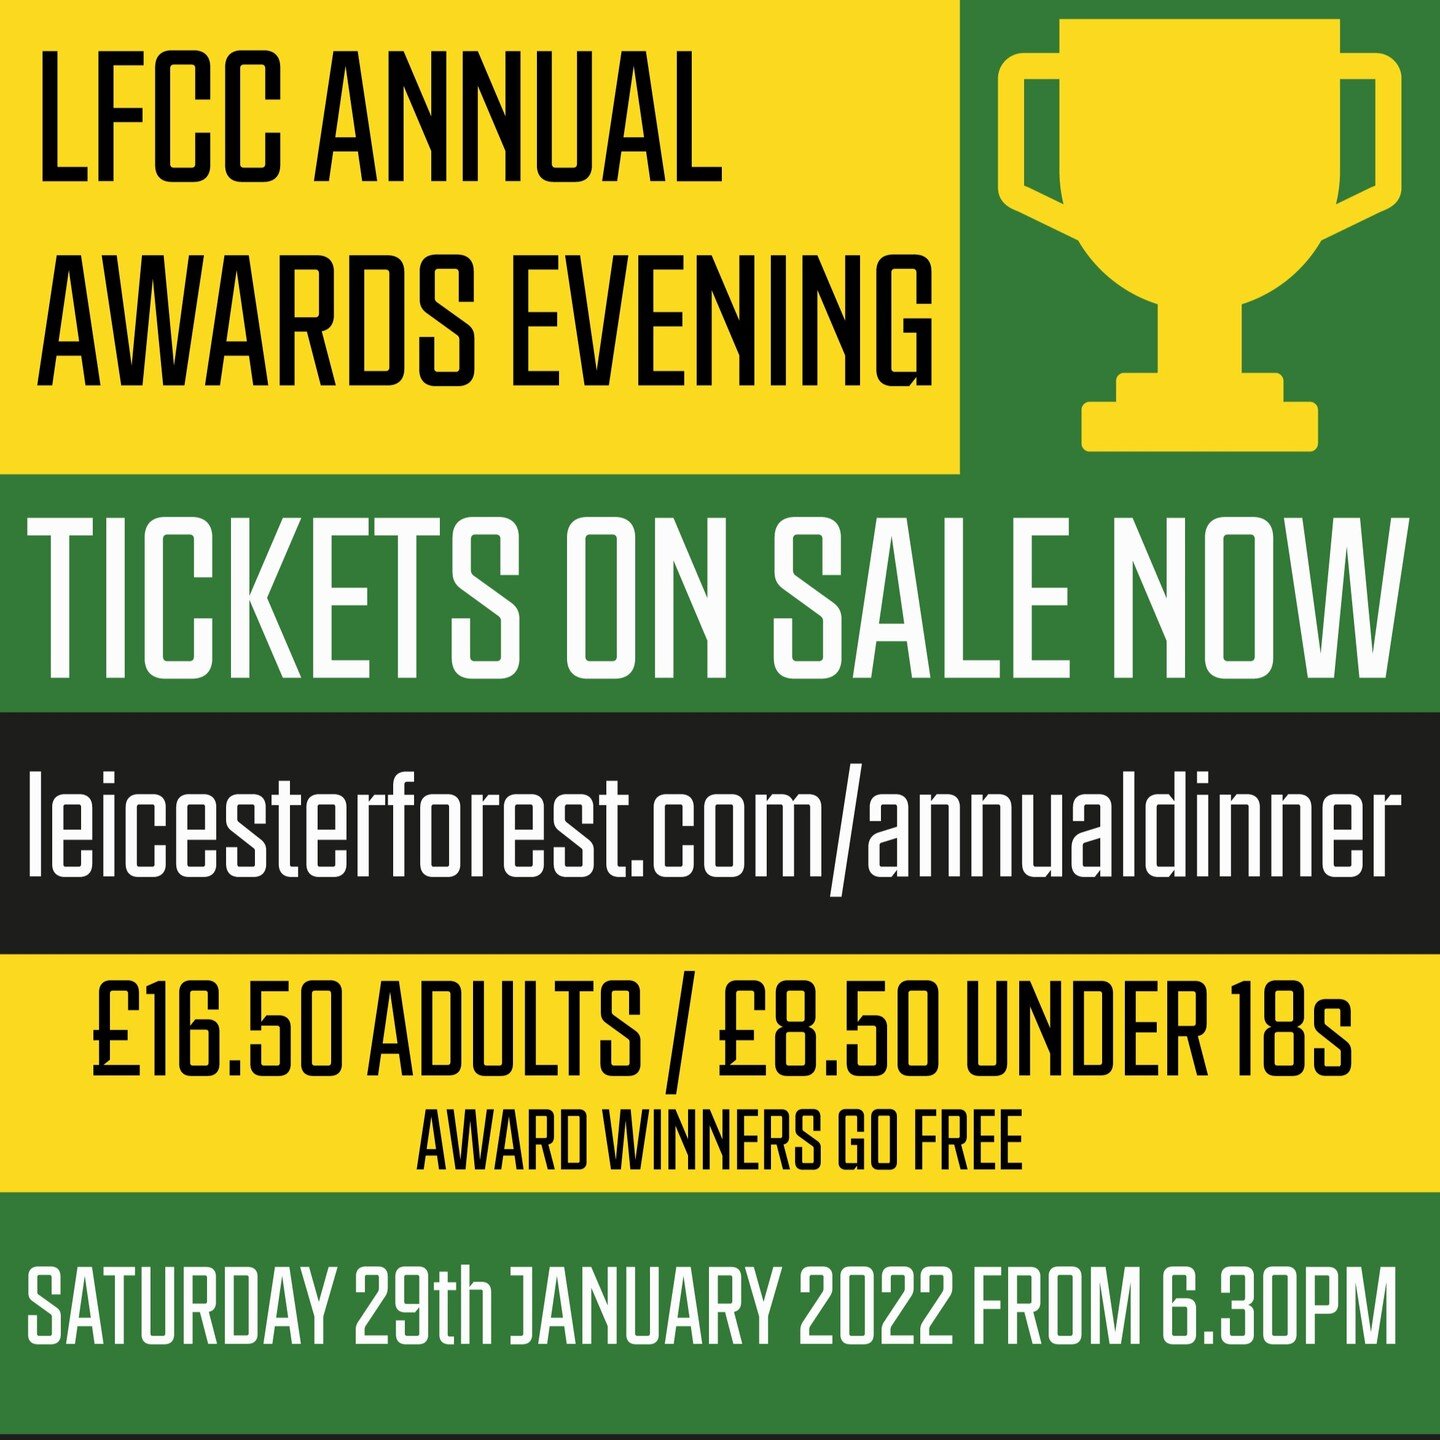 Ticket on sale for members at www.leicesterforest.com/annualdinner